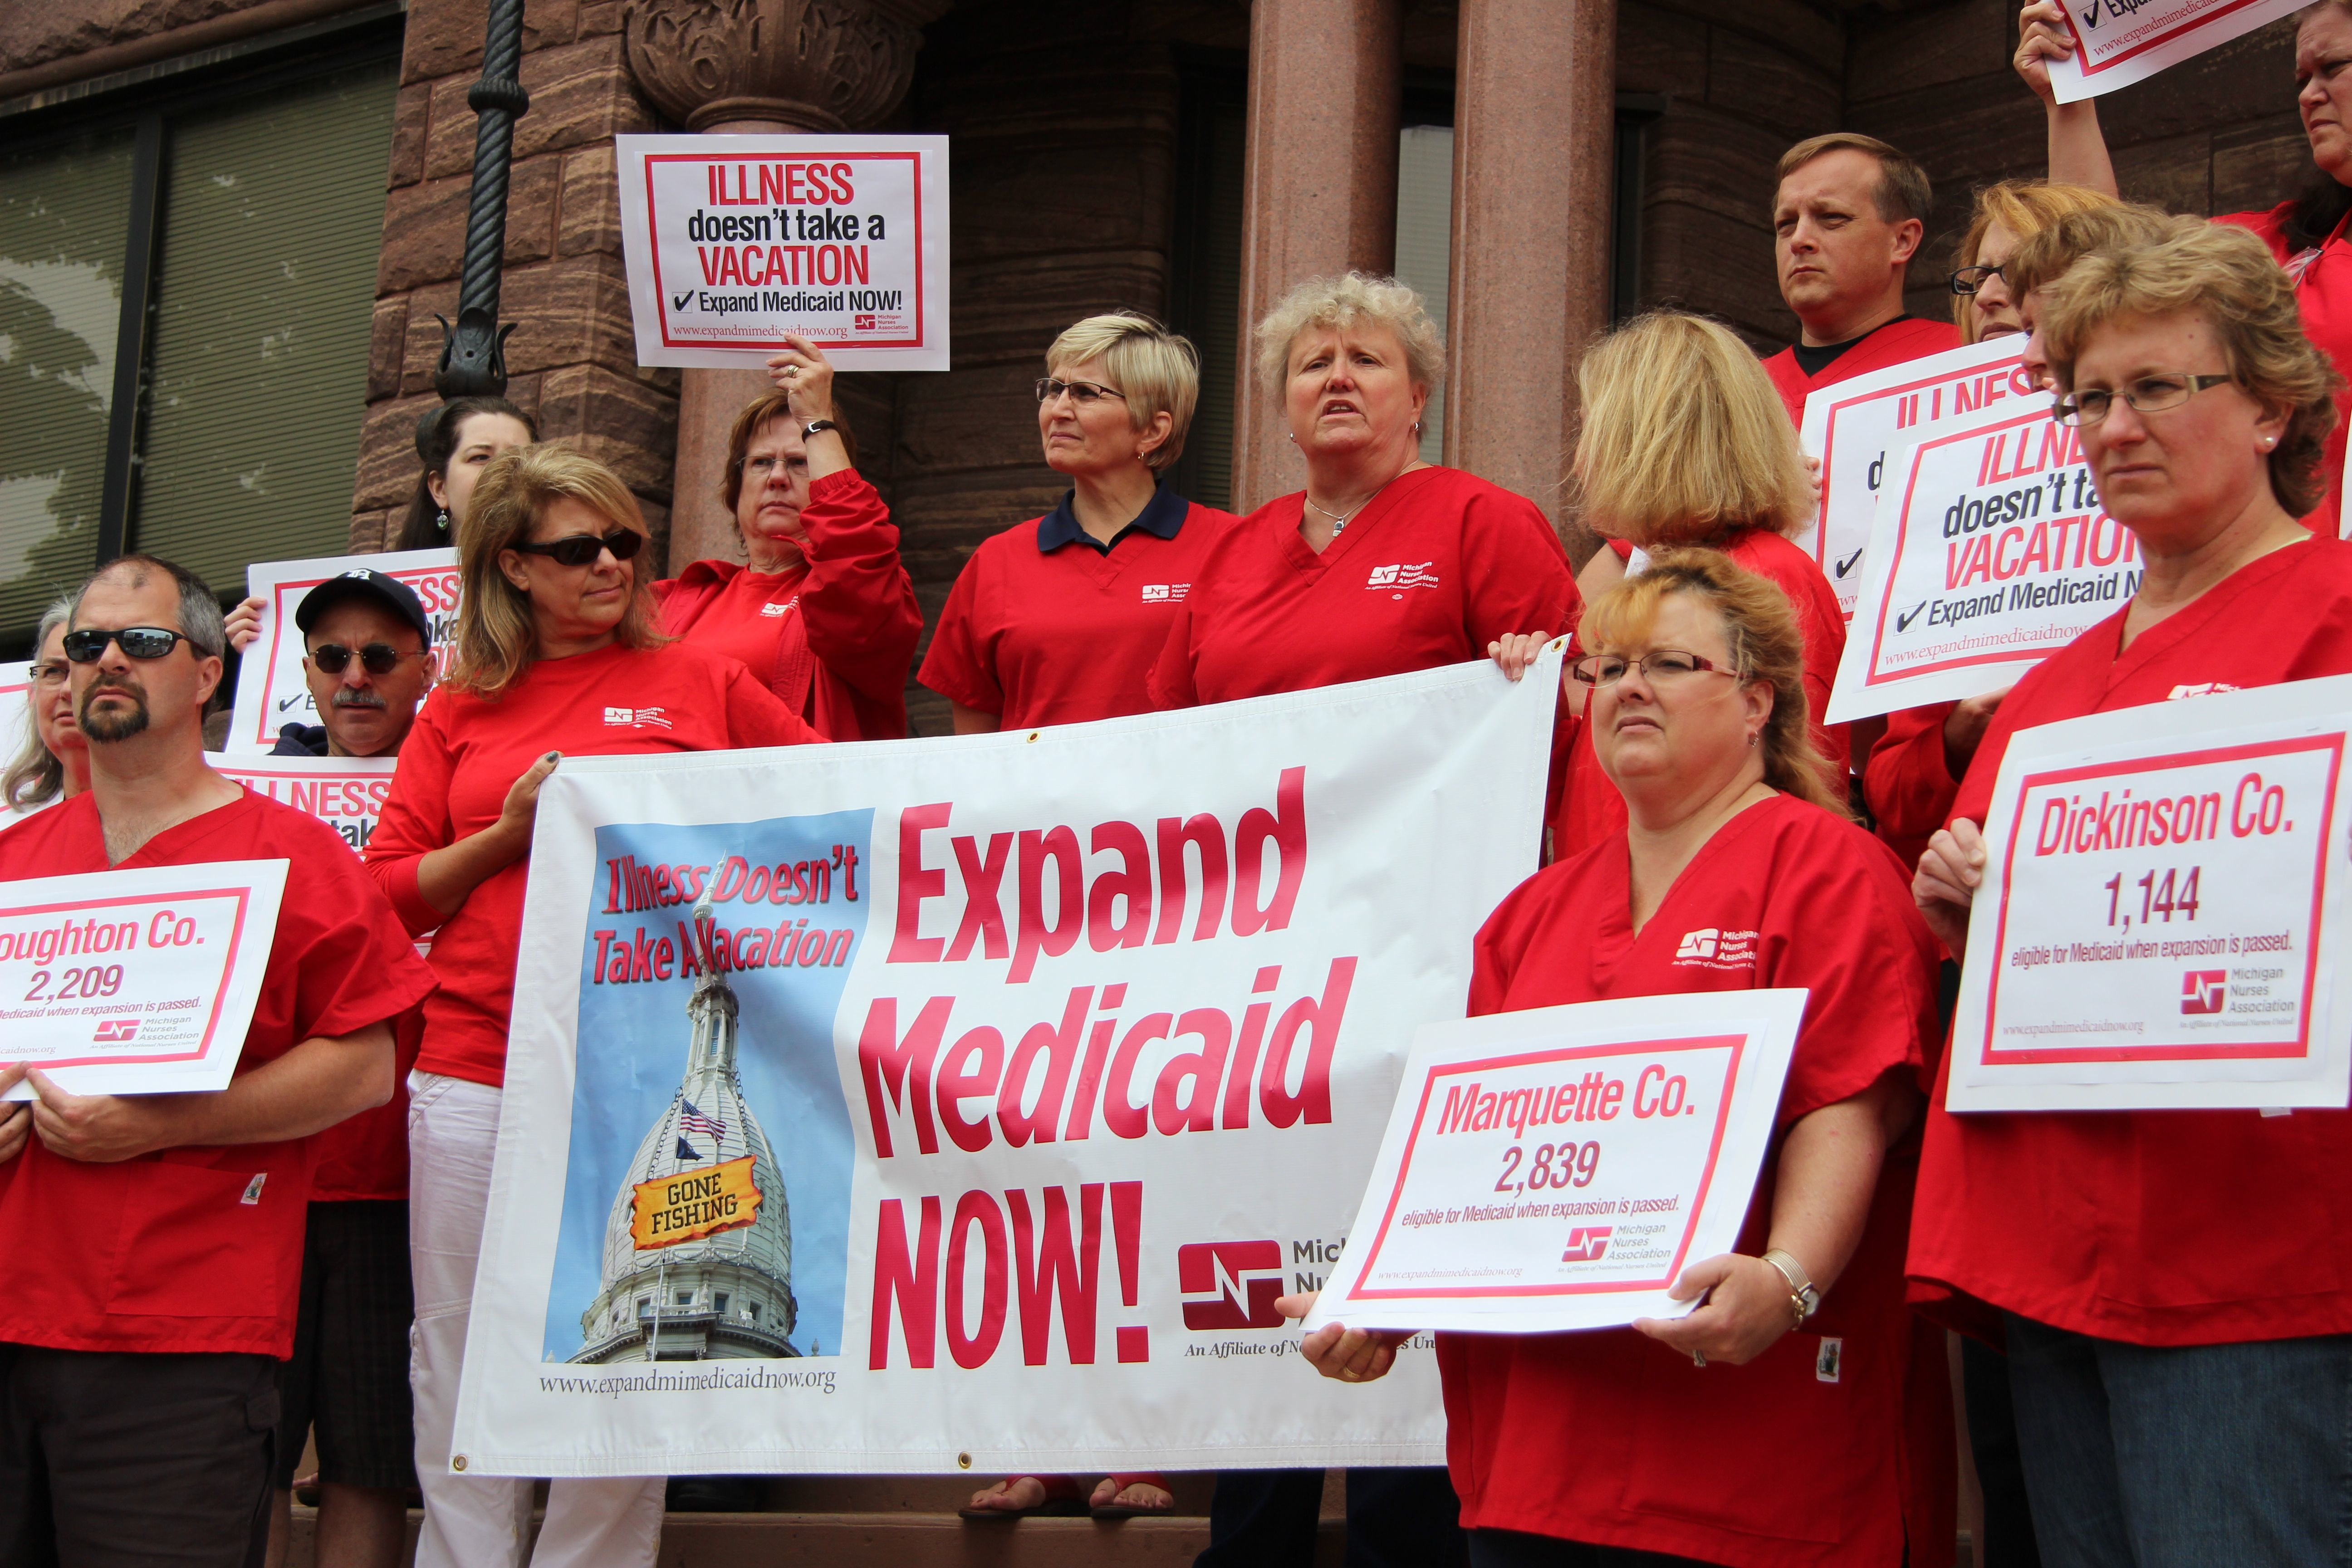 ACTION: Speak now in support of Michigan Medicaid expansion